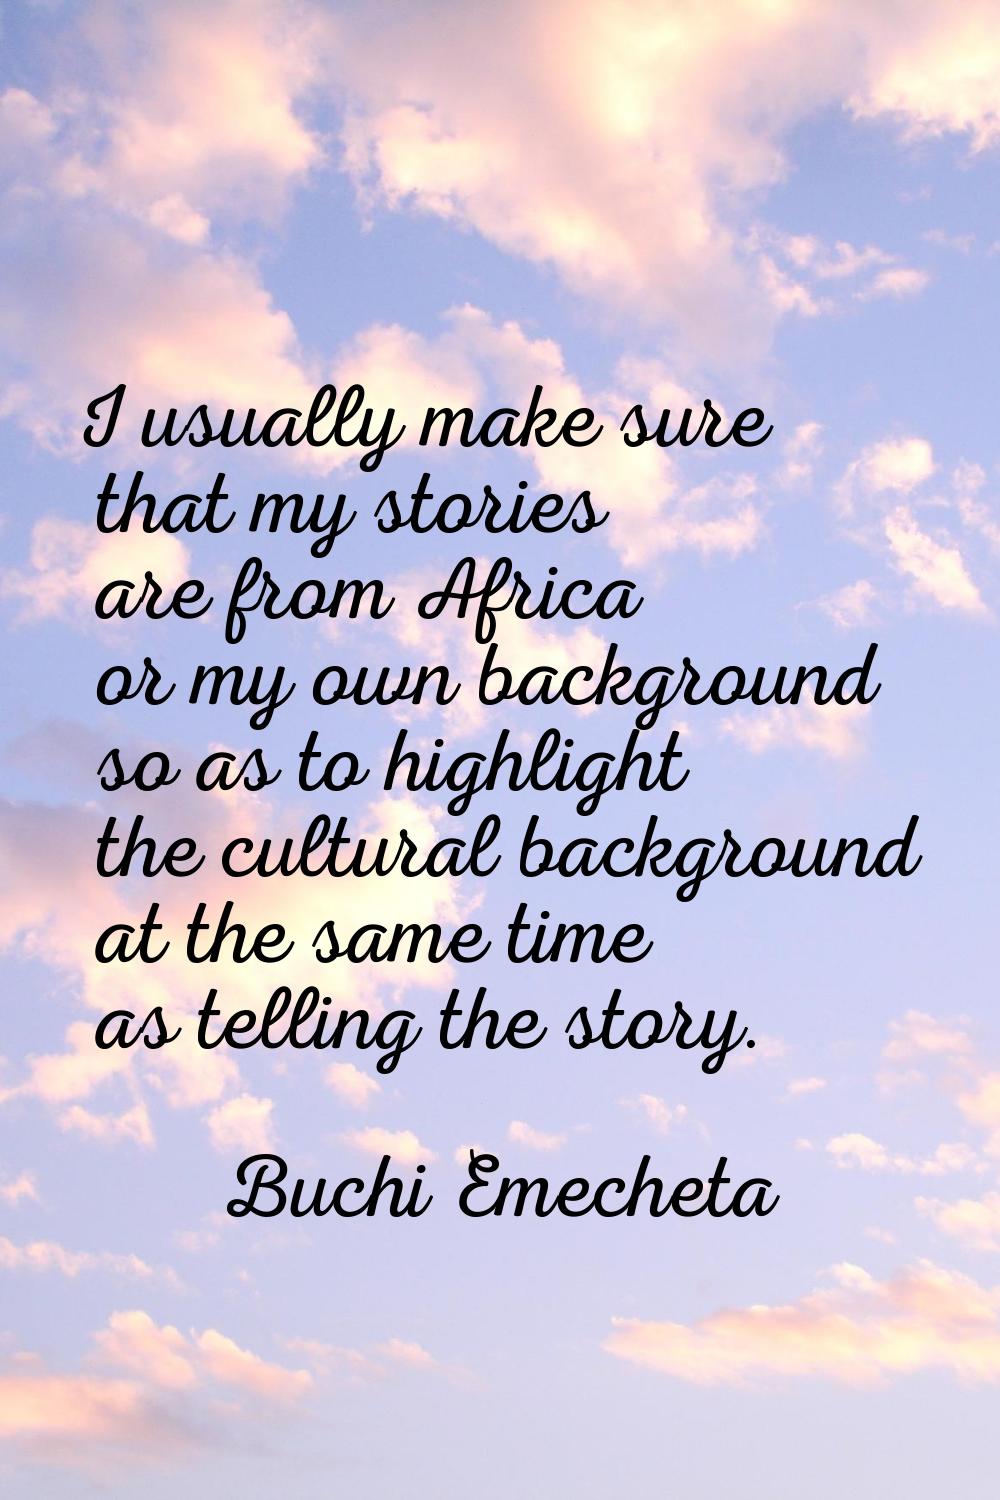 I usually make sure that my stories are from Africa or my own background so as to highlight the cul